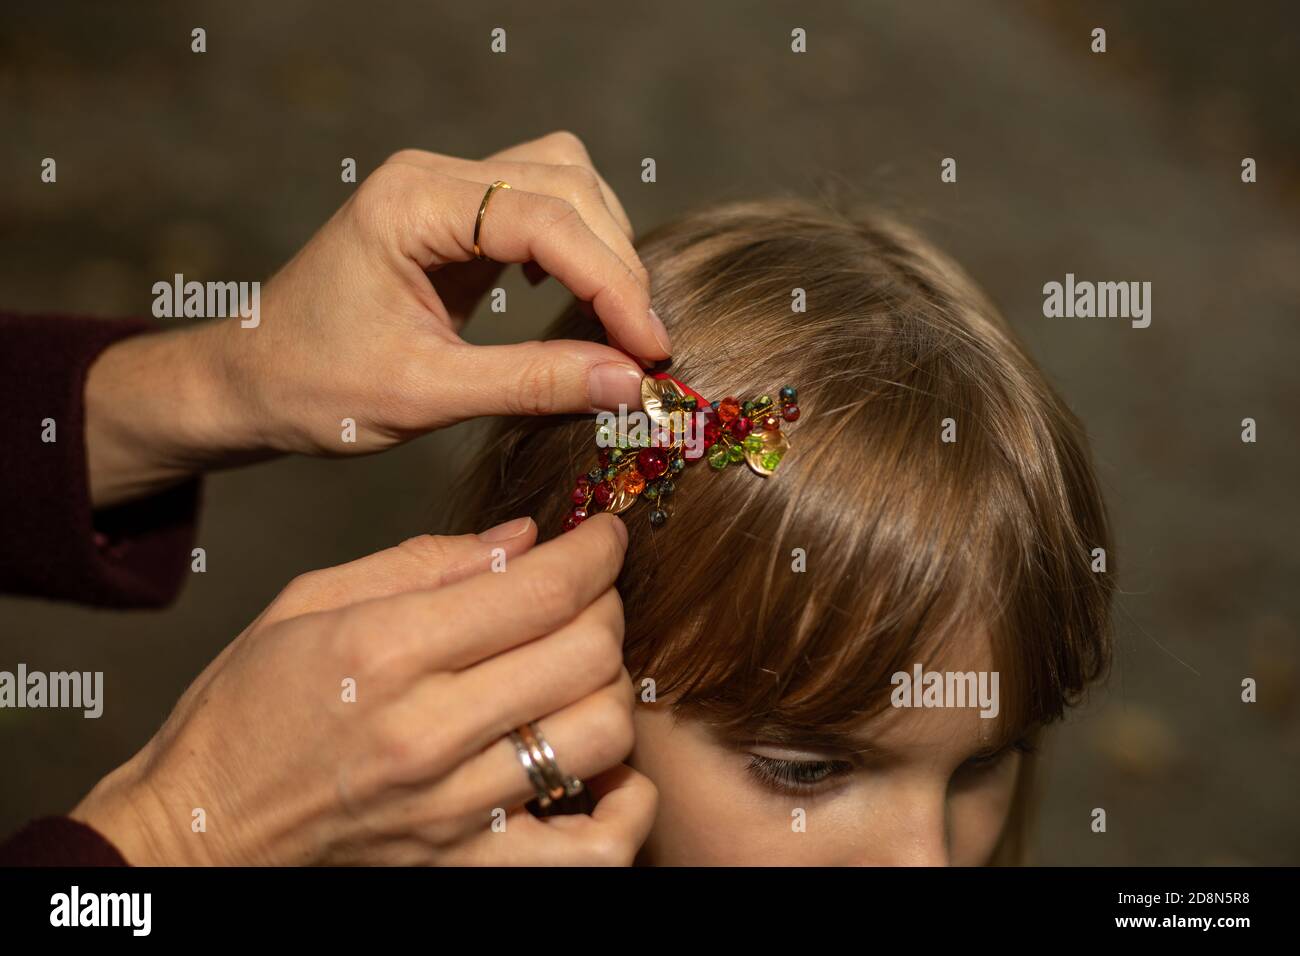 Women's hands of a mother or caregiver carefully fasten a hair clip on the hair of a little girl outdoors. Hair accessories Stock Photo